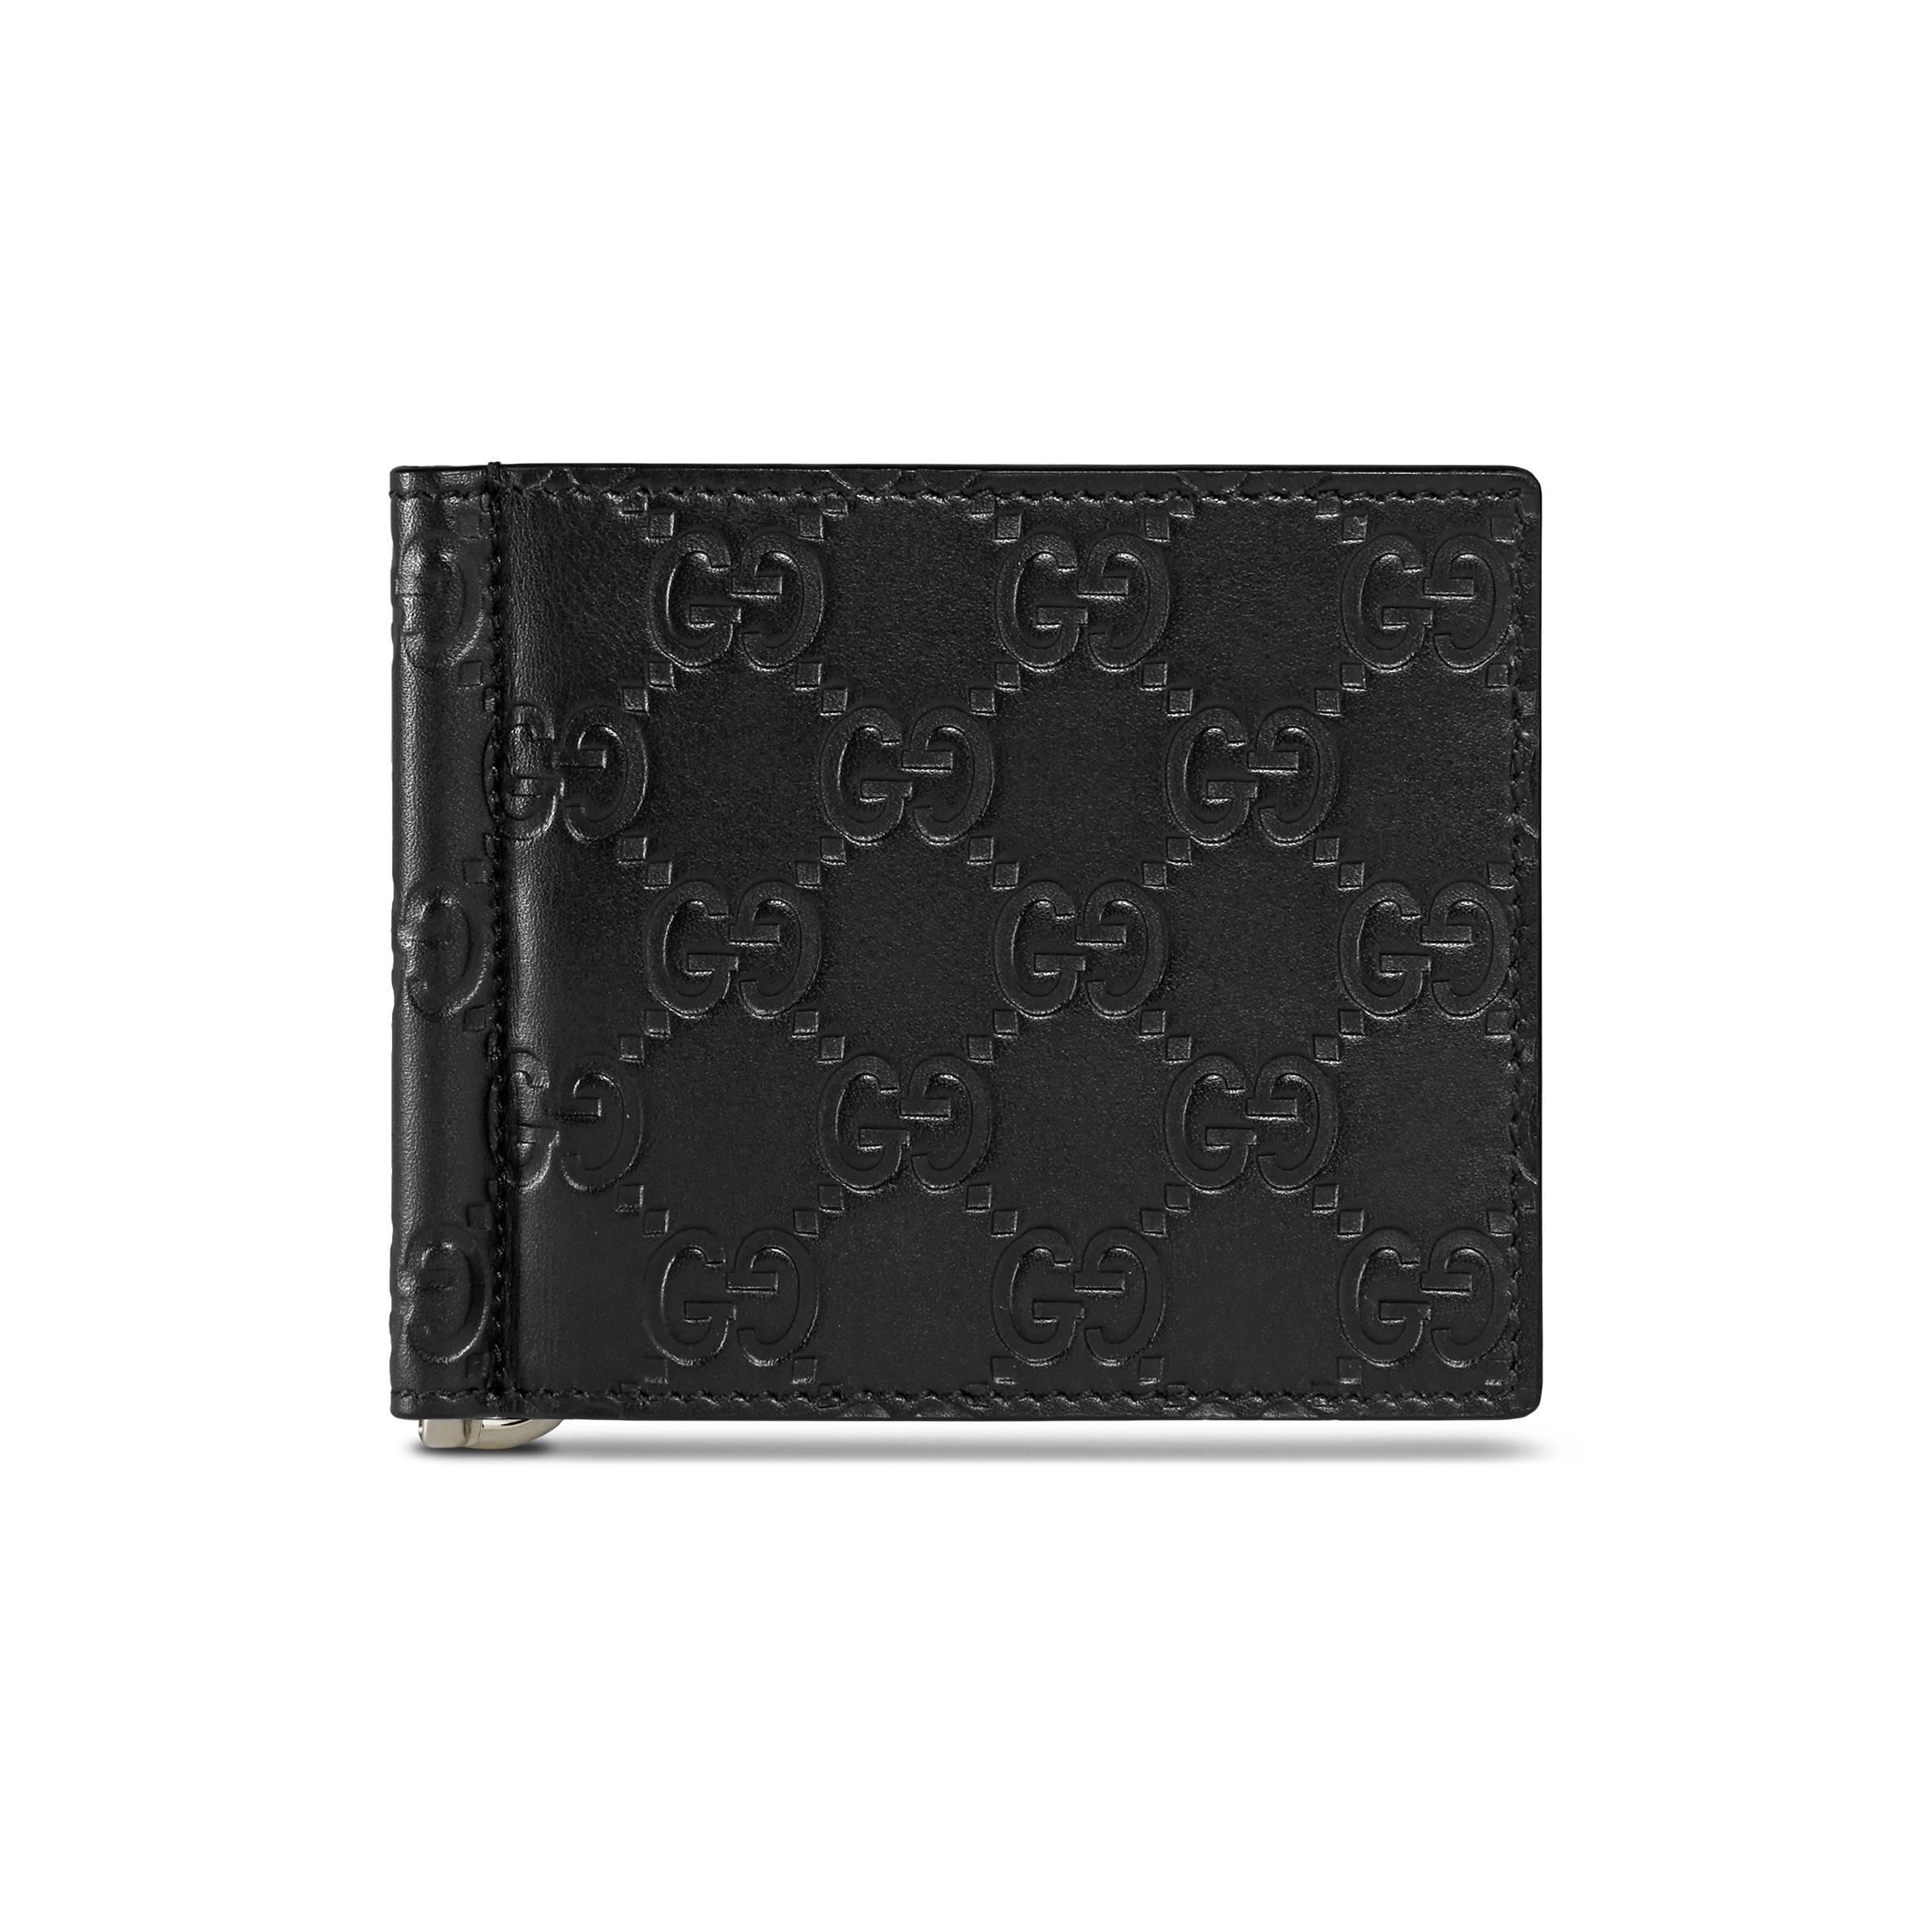 Gucci Leather Signature Money Clip Wallet in Black for Men - Lyst